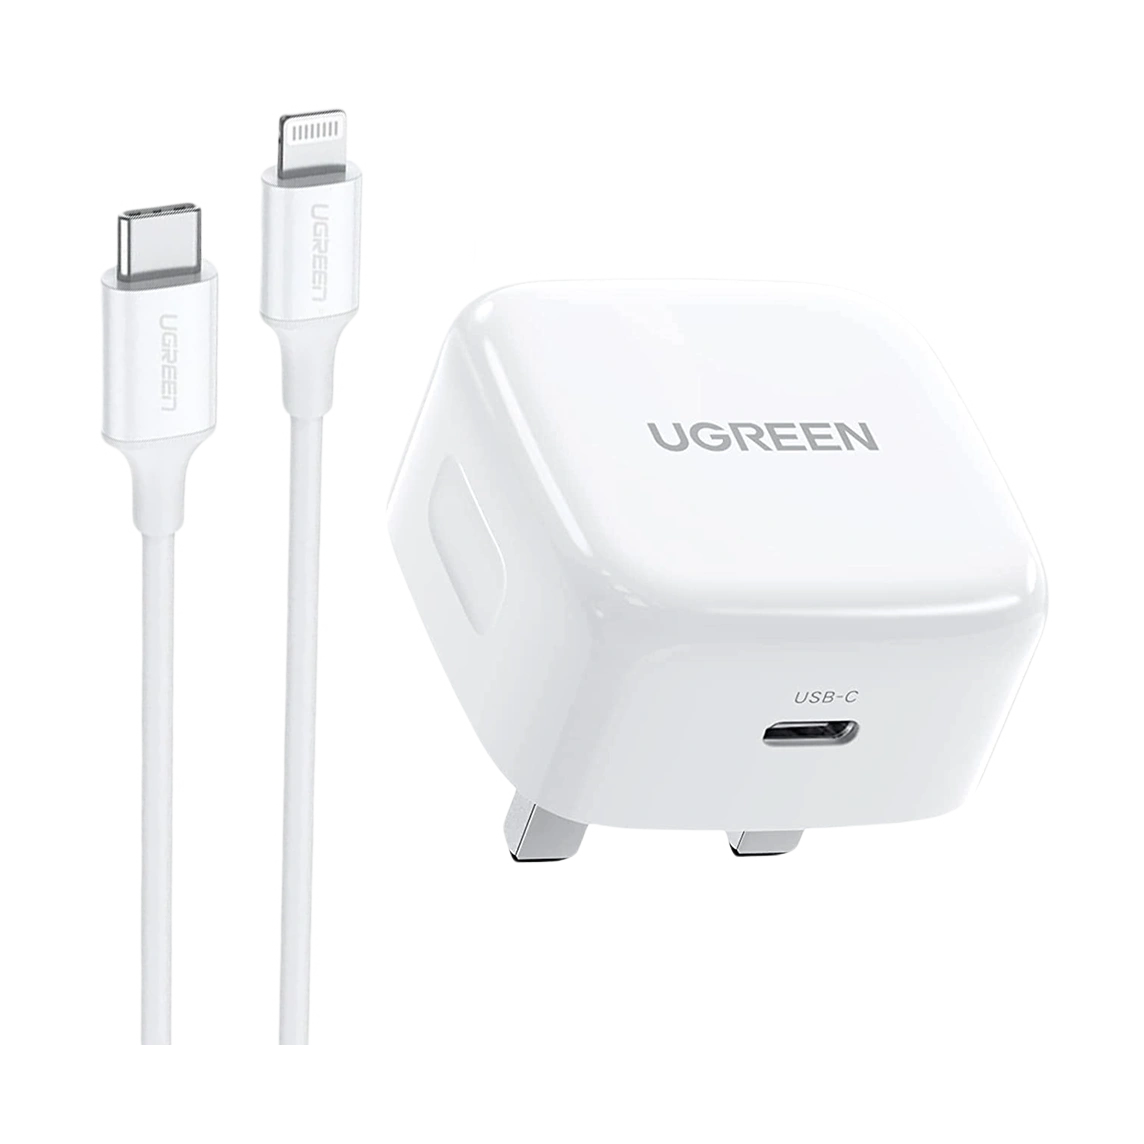 ugreen-usb-c-pd-fast-charger-uk-usb-c-to-lightning-cable-70297